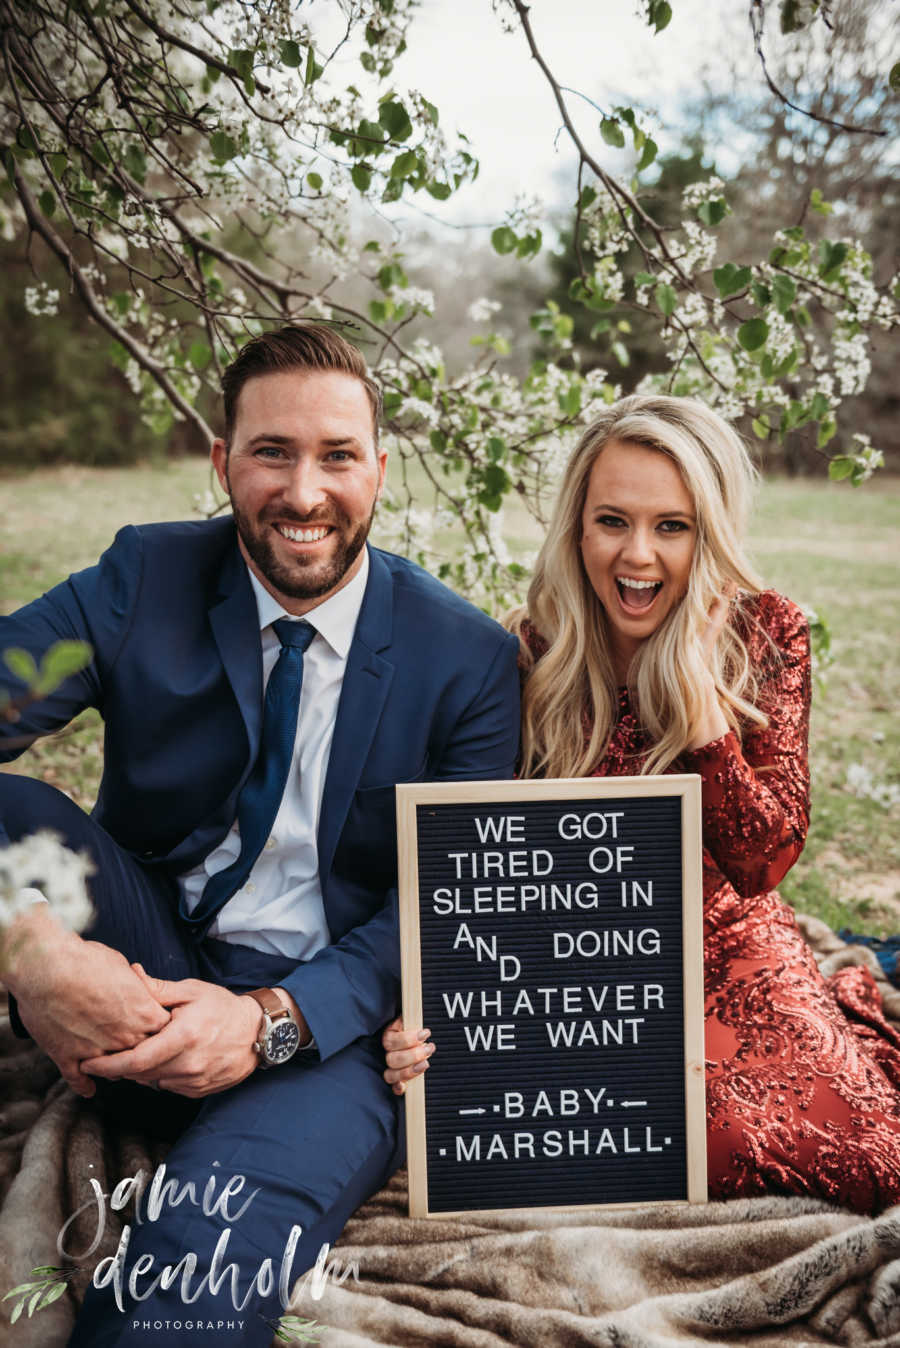 Husband and wife sit on blanket outside smiling beside sign that says, "We got tired of sleeping in..."